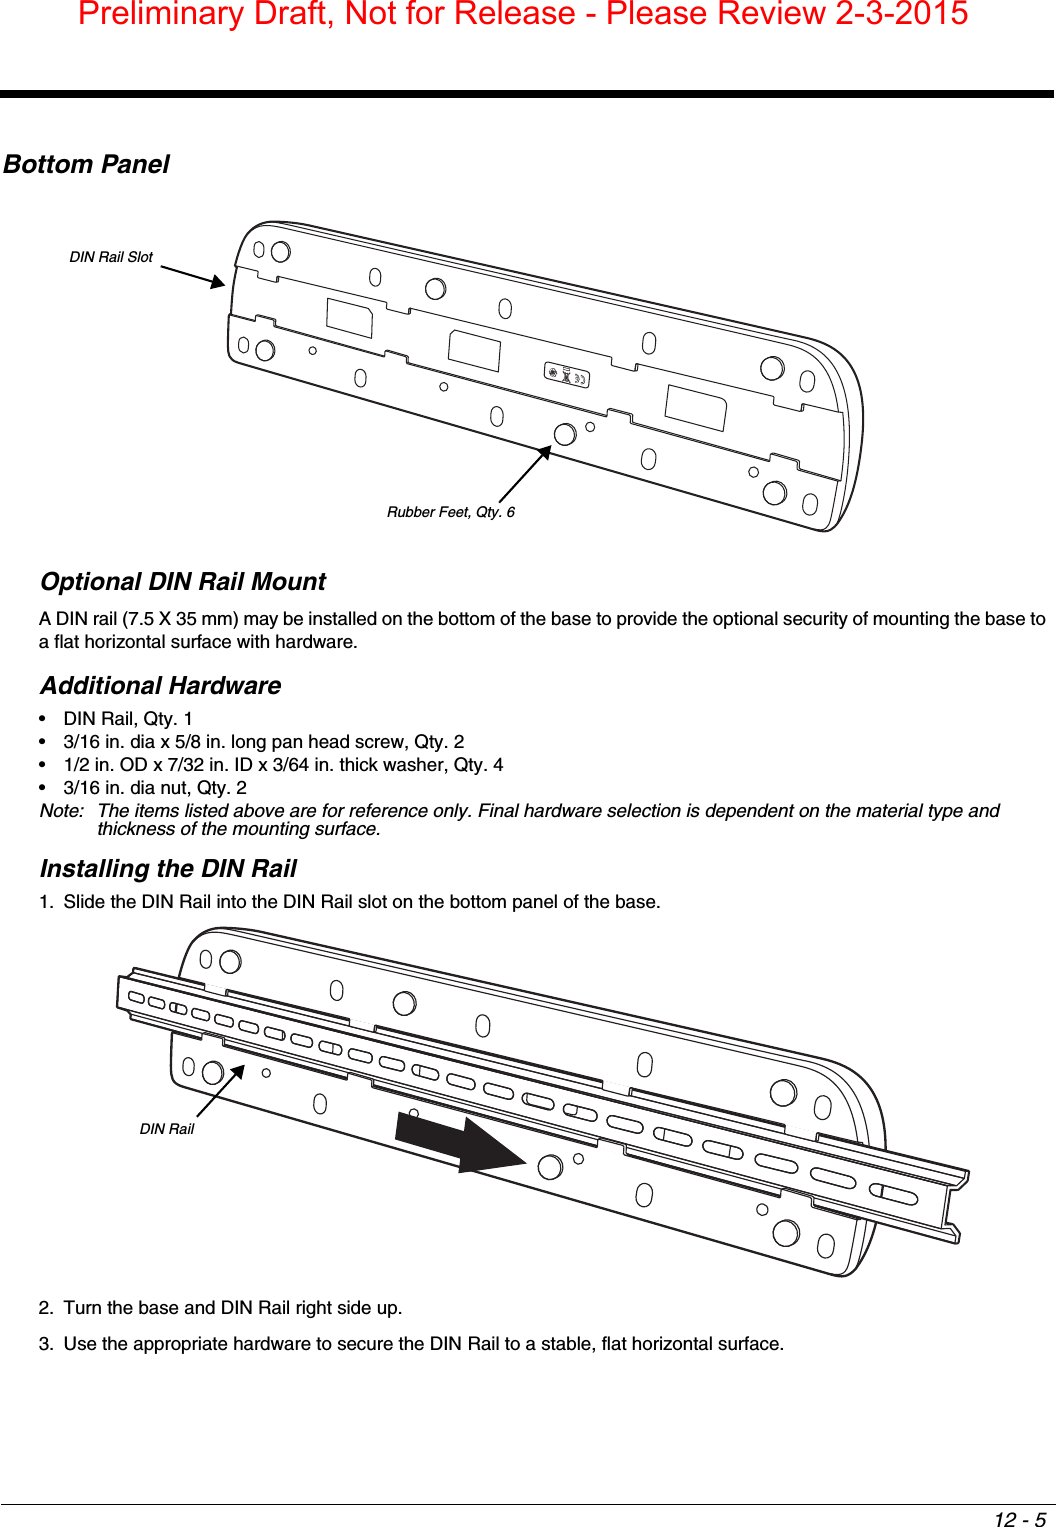 12 - 5Bottom PanelOptional DIN Rail MountA DIN rail (7.5 X 35 mm) may be installed on the bottom of the base to provide the optional security of mounting the base to a flat horizontal surface with hardware.Additional Hardware• DIN Rail, Qty. 1• 3/16 in. dia x 5/8 in. long pan head screw, Qty. 2• 1/2 in. OD x 7/32 in. ID x 3/64 in. thick washer, Qty. 4• 3/16 in. dia nut, Qty. 2Note: The items listed above are for reference only. Final hardware selection is dependent on the material type and thickness of the mounting surface. Installing the DIN Rail1. Slide the DIN Rail into the DIN Rail slot on the bottom panel of the base. 2. Turn the base and DIN Rail right side up.3. Use the appropriate hardware to secure the DIN Rail to a stable, flat horizontal surface. DIN Rail SlotRubber Feet, Qty. 6DIN RailPreliminary Draft, Not for Release - Please Review 2-3-2015